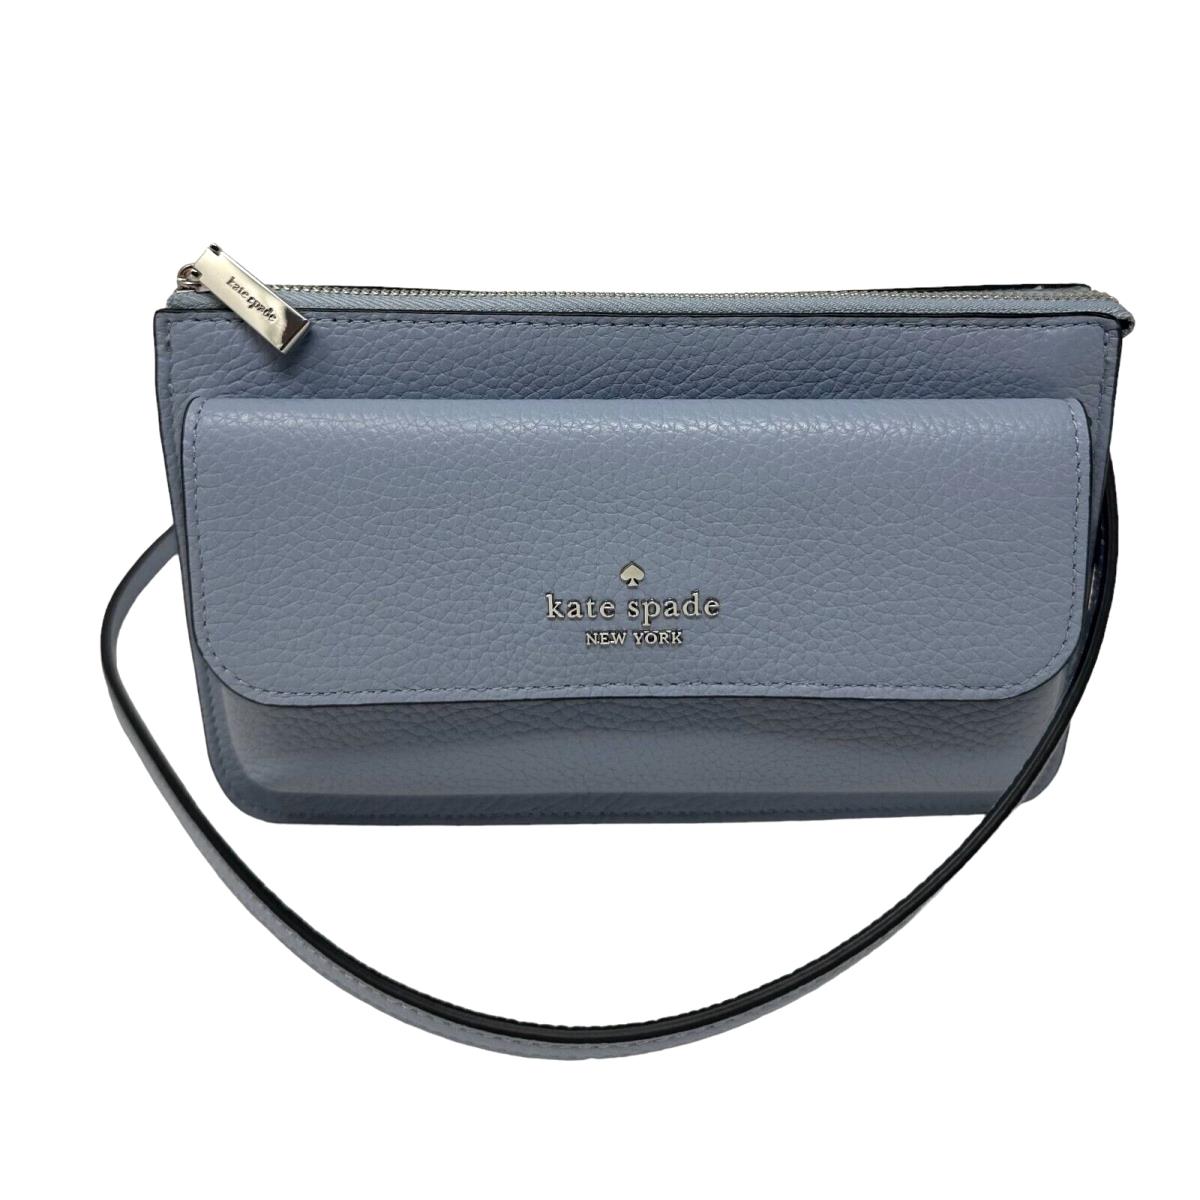 Kate Spade Leila Small Flap Pebbled Leather Crossbody Bag Muted Blue K8284 - Exterior: Muted Blue